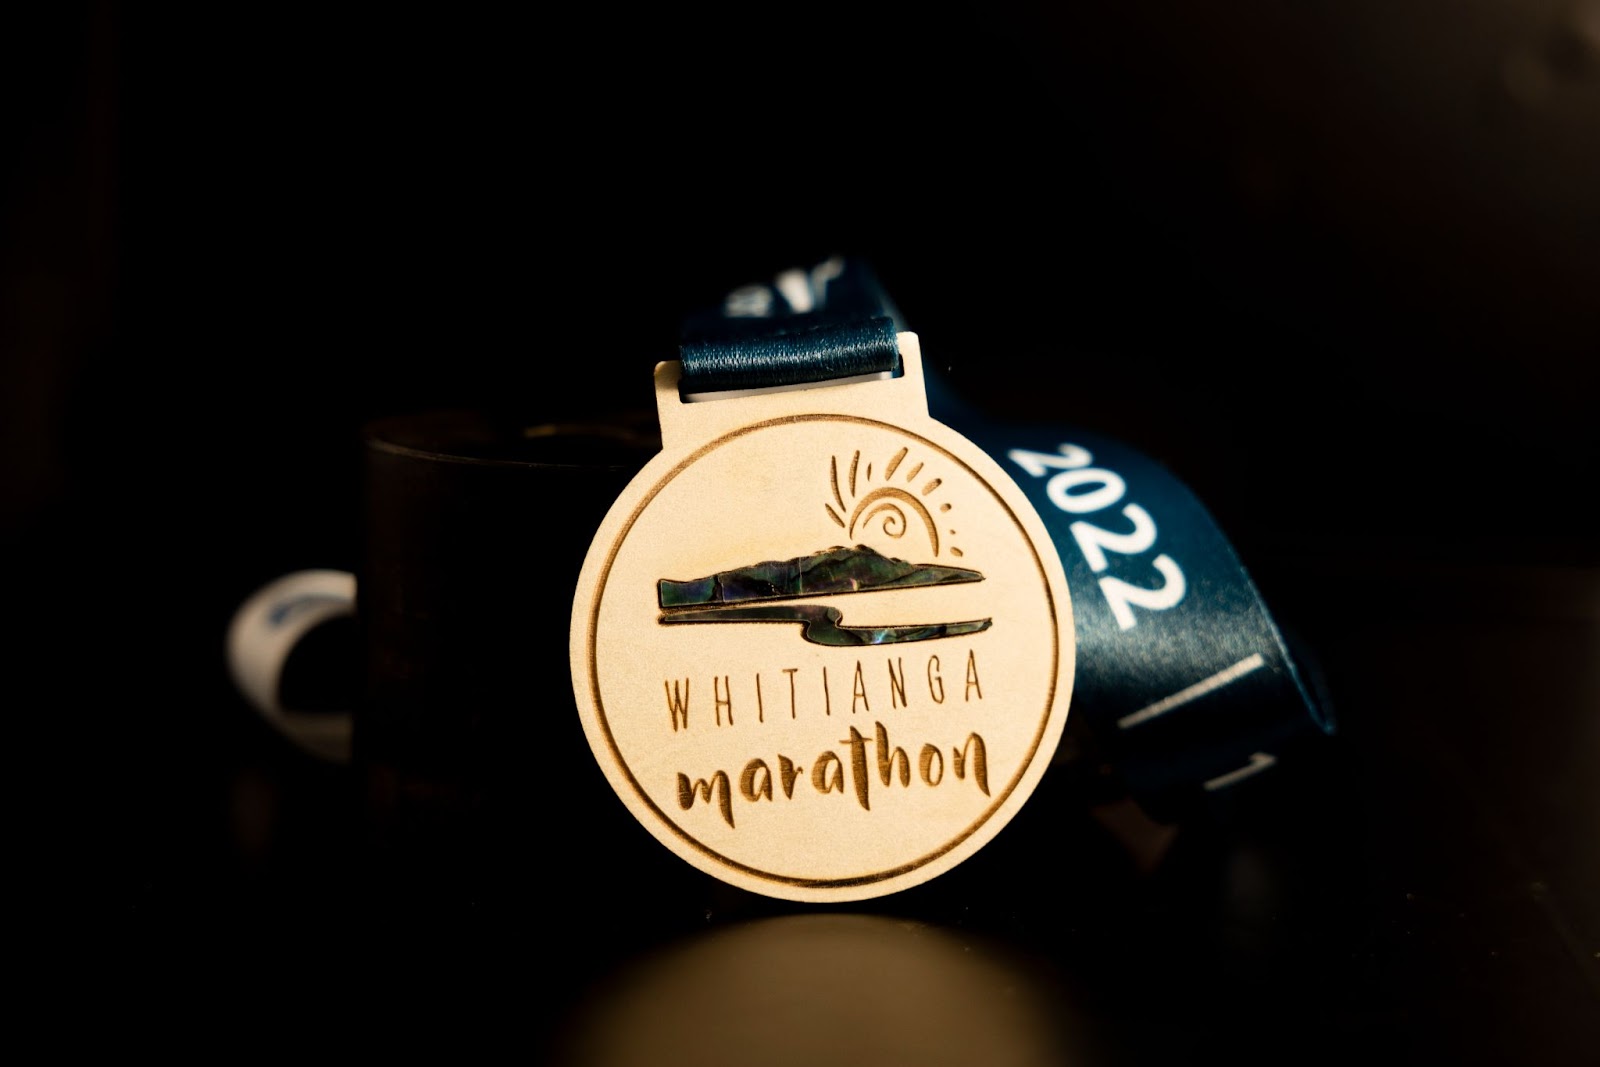 A custom wooden medal made for Whitianga Marathon.